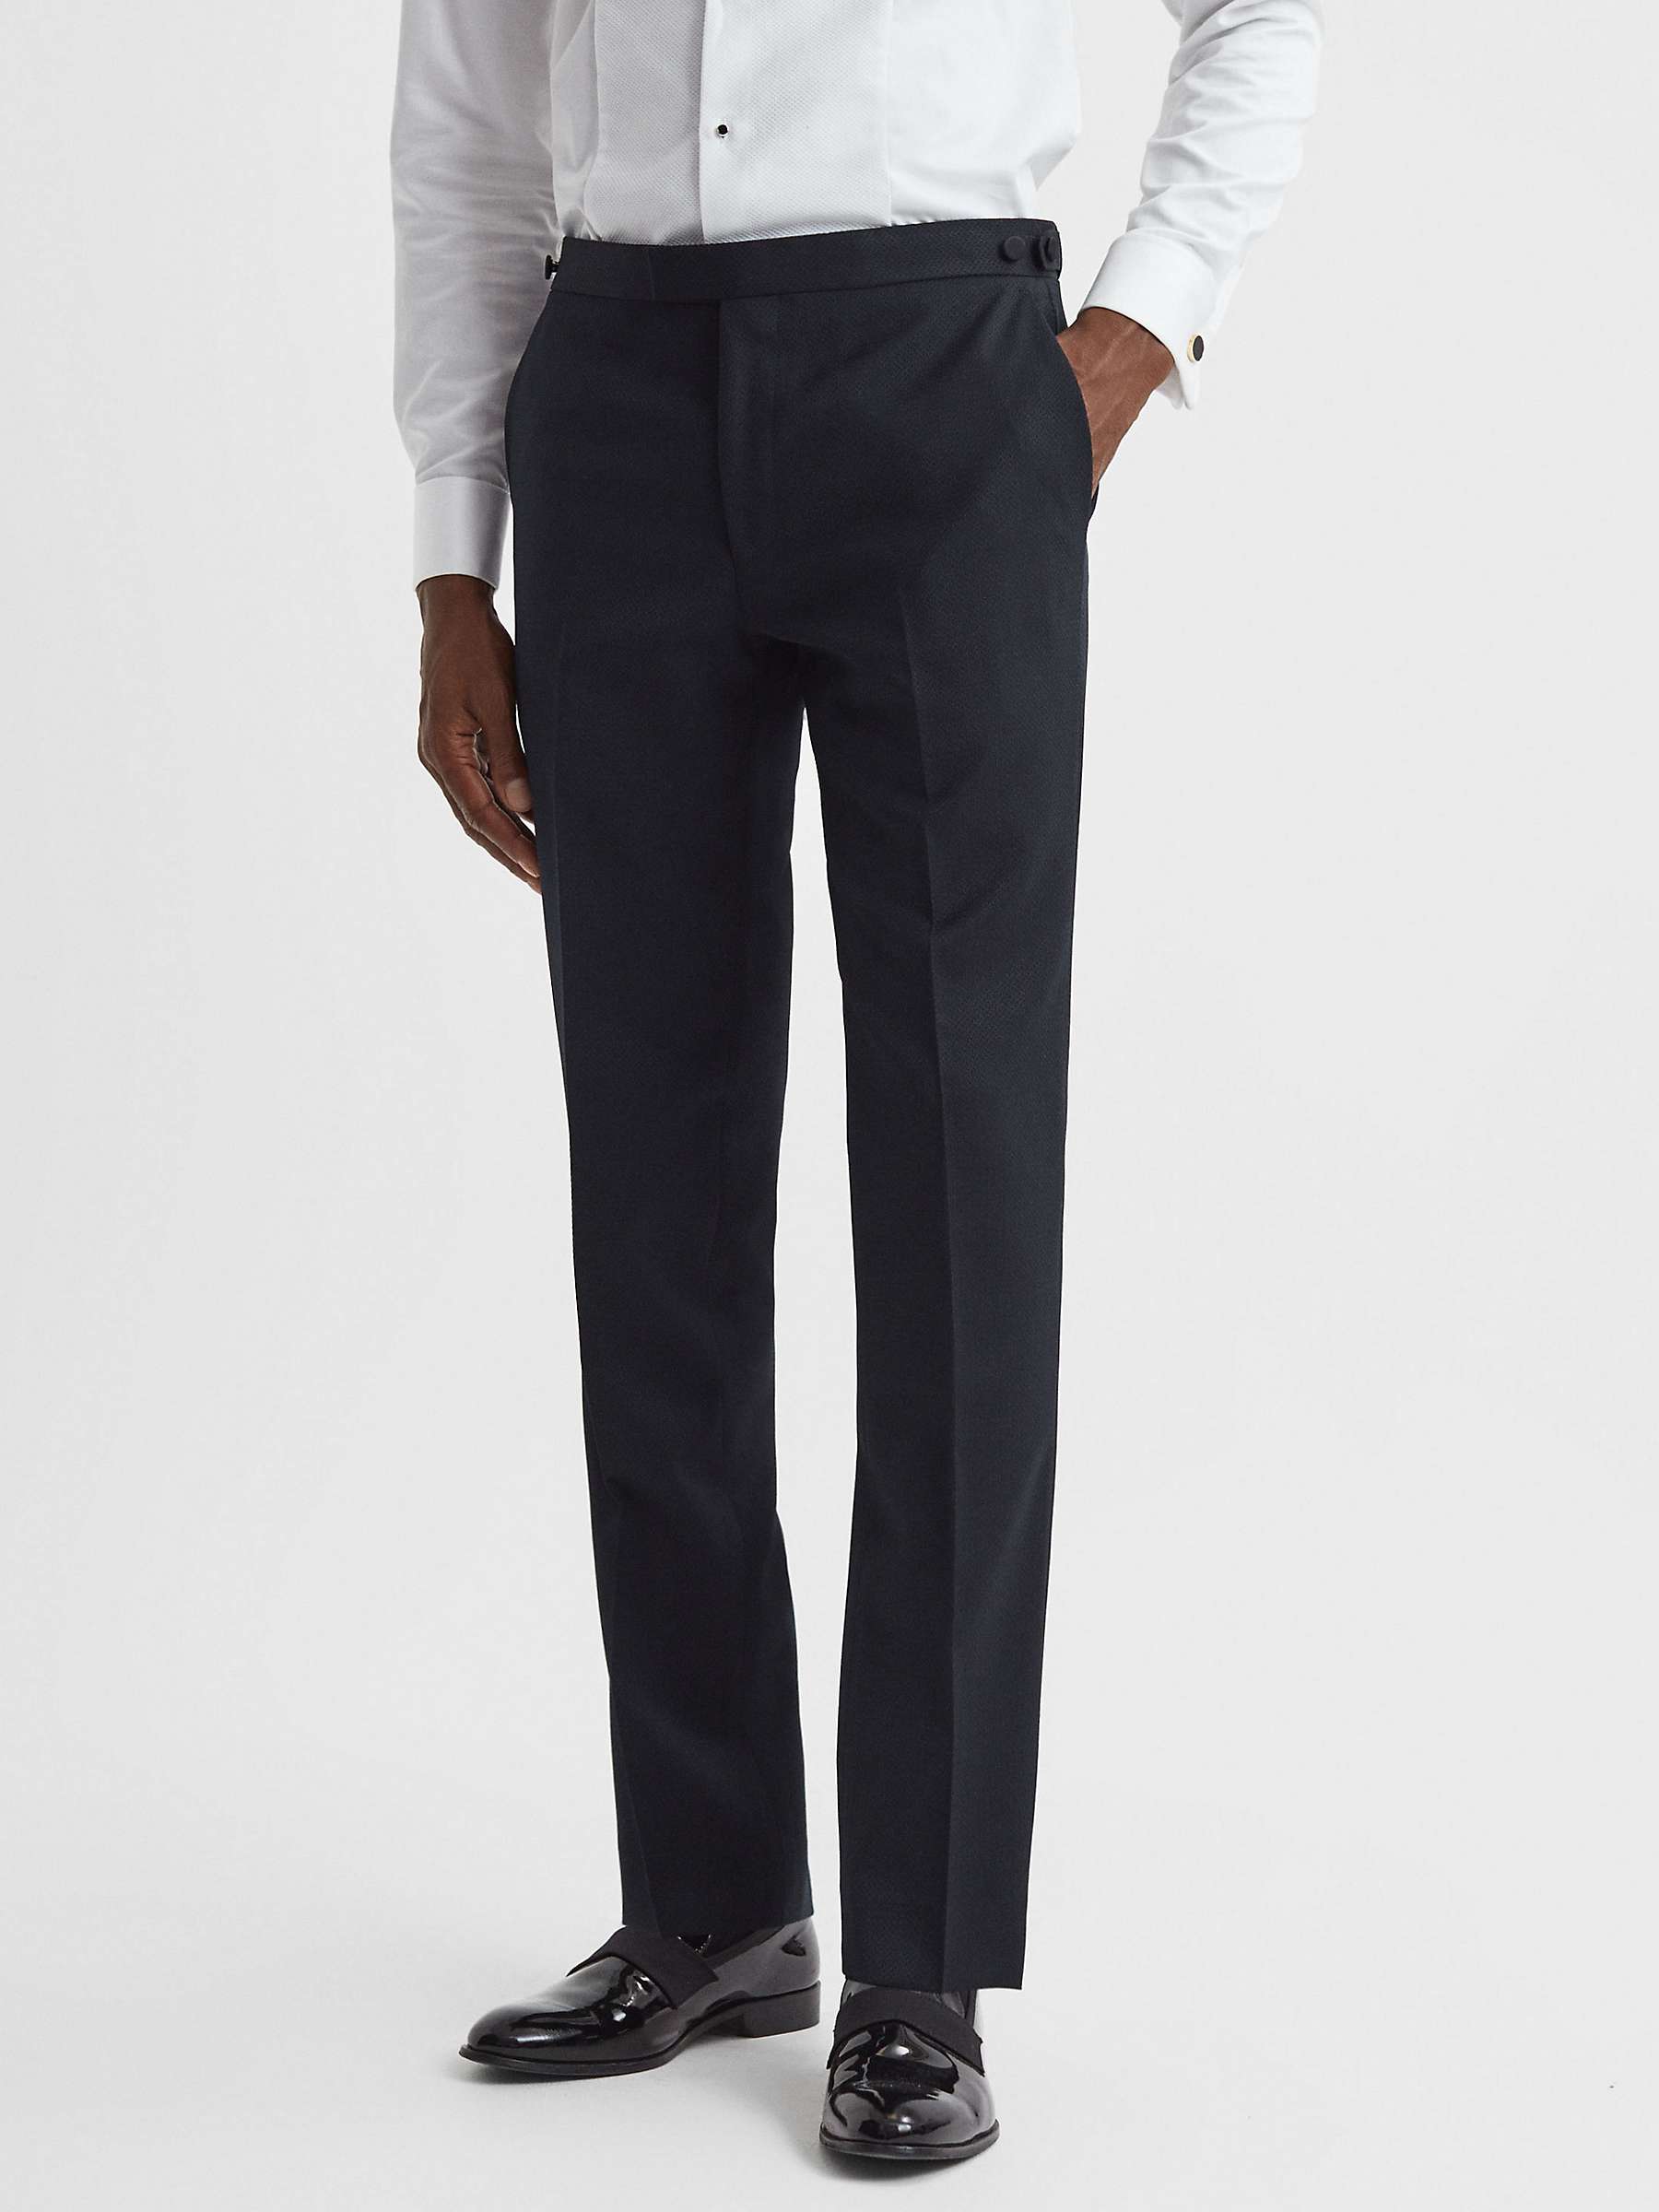 Buy Reiss Deal Wool Blend Jacquard Suit Trousers, Navy Online at johnlewis.com